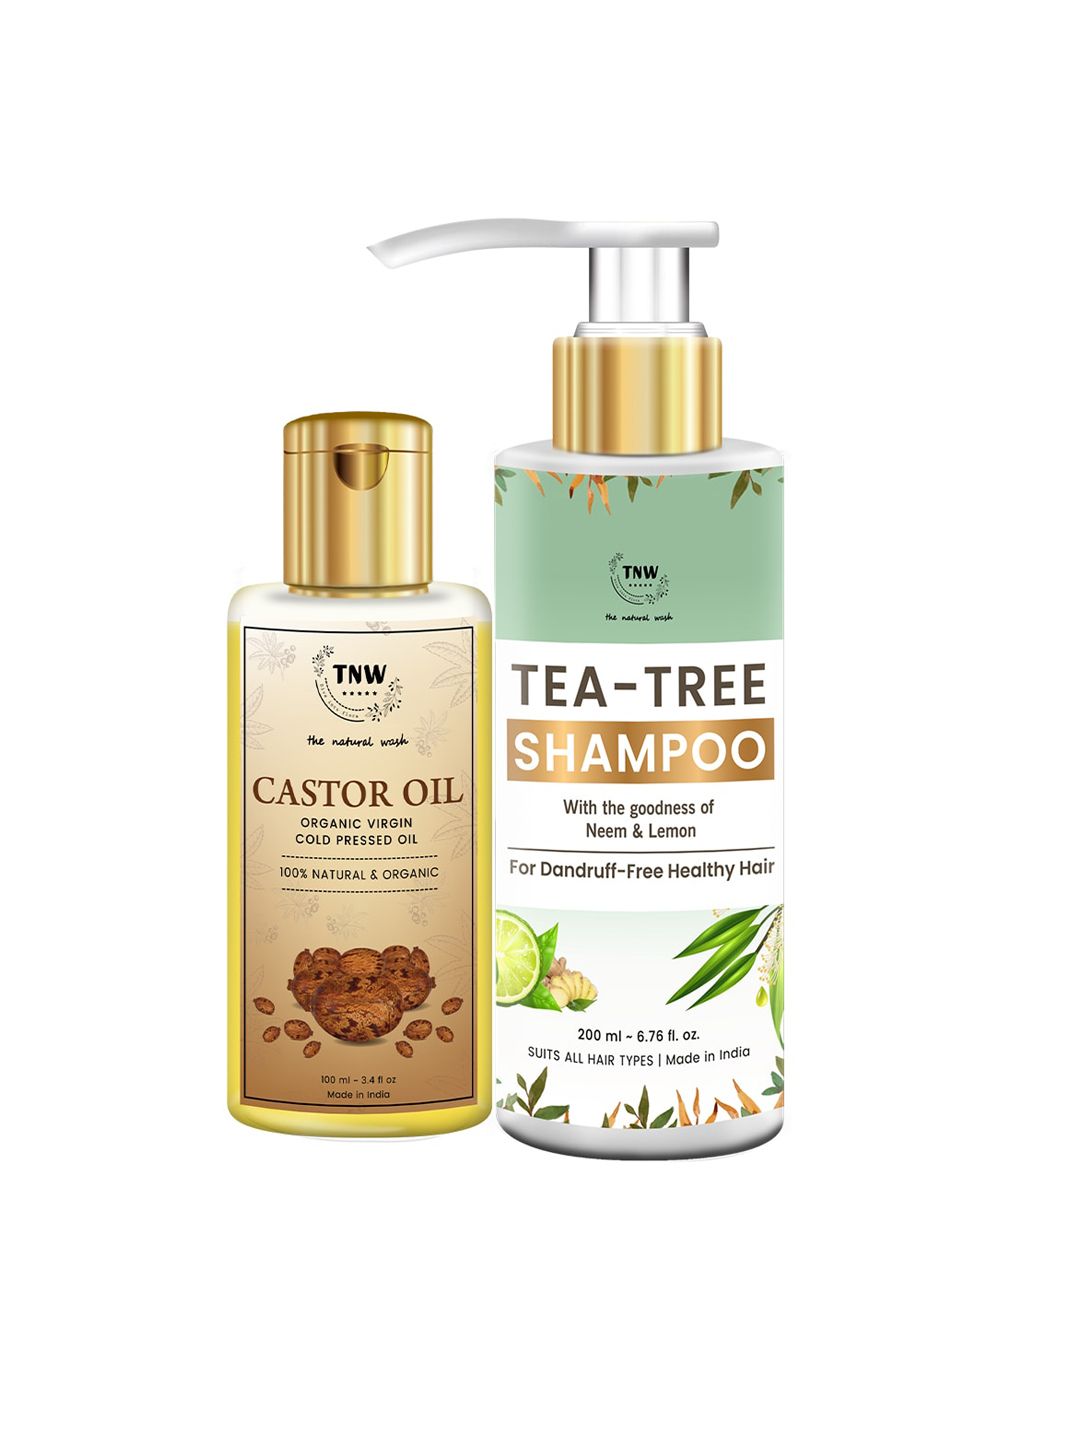 TNW the natural wash Pack of Tea Tree Shampoo and Castor Oil for Dandruff-Free Price in India